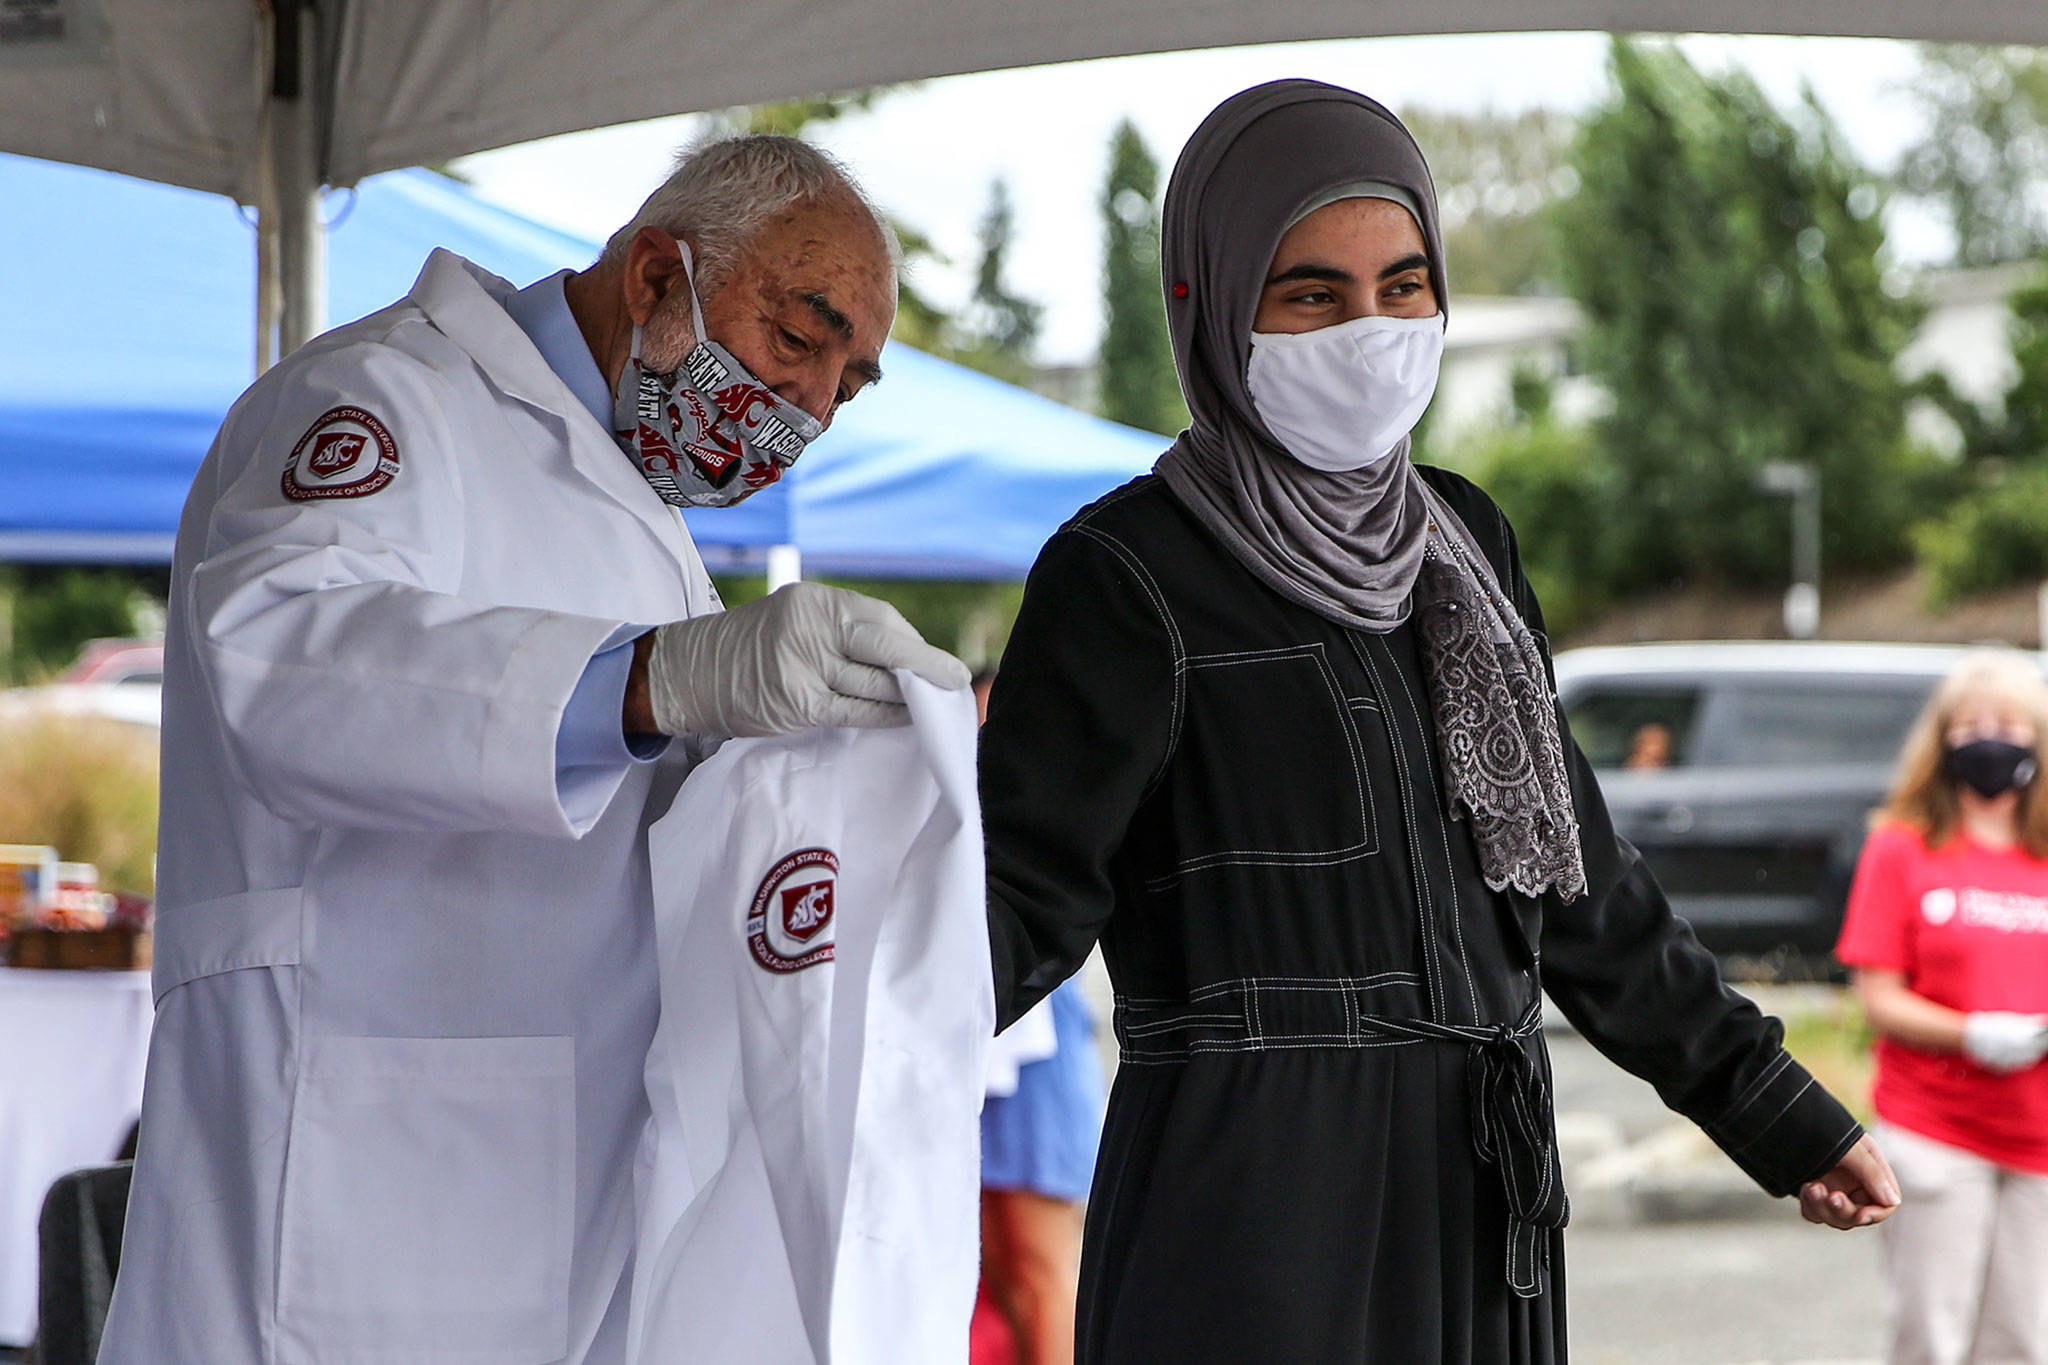 Miriam Al-Saedy has her white coat adorned by Associate Dean Larry Schecter in the parking lot of the WSU Everett Campus on Friday. (Kevin Clark / The Herald)